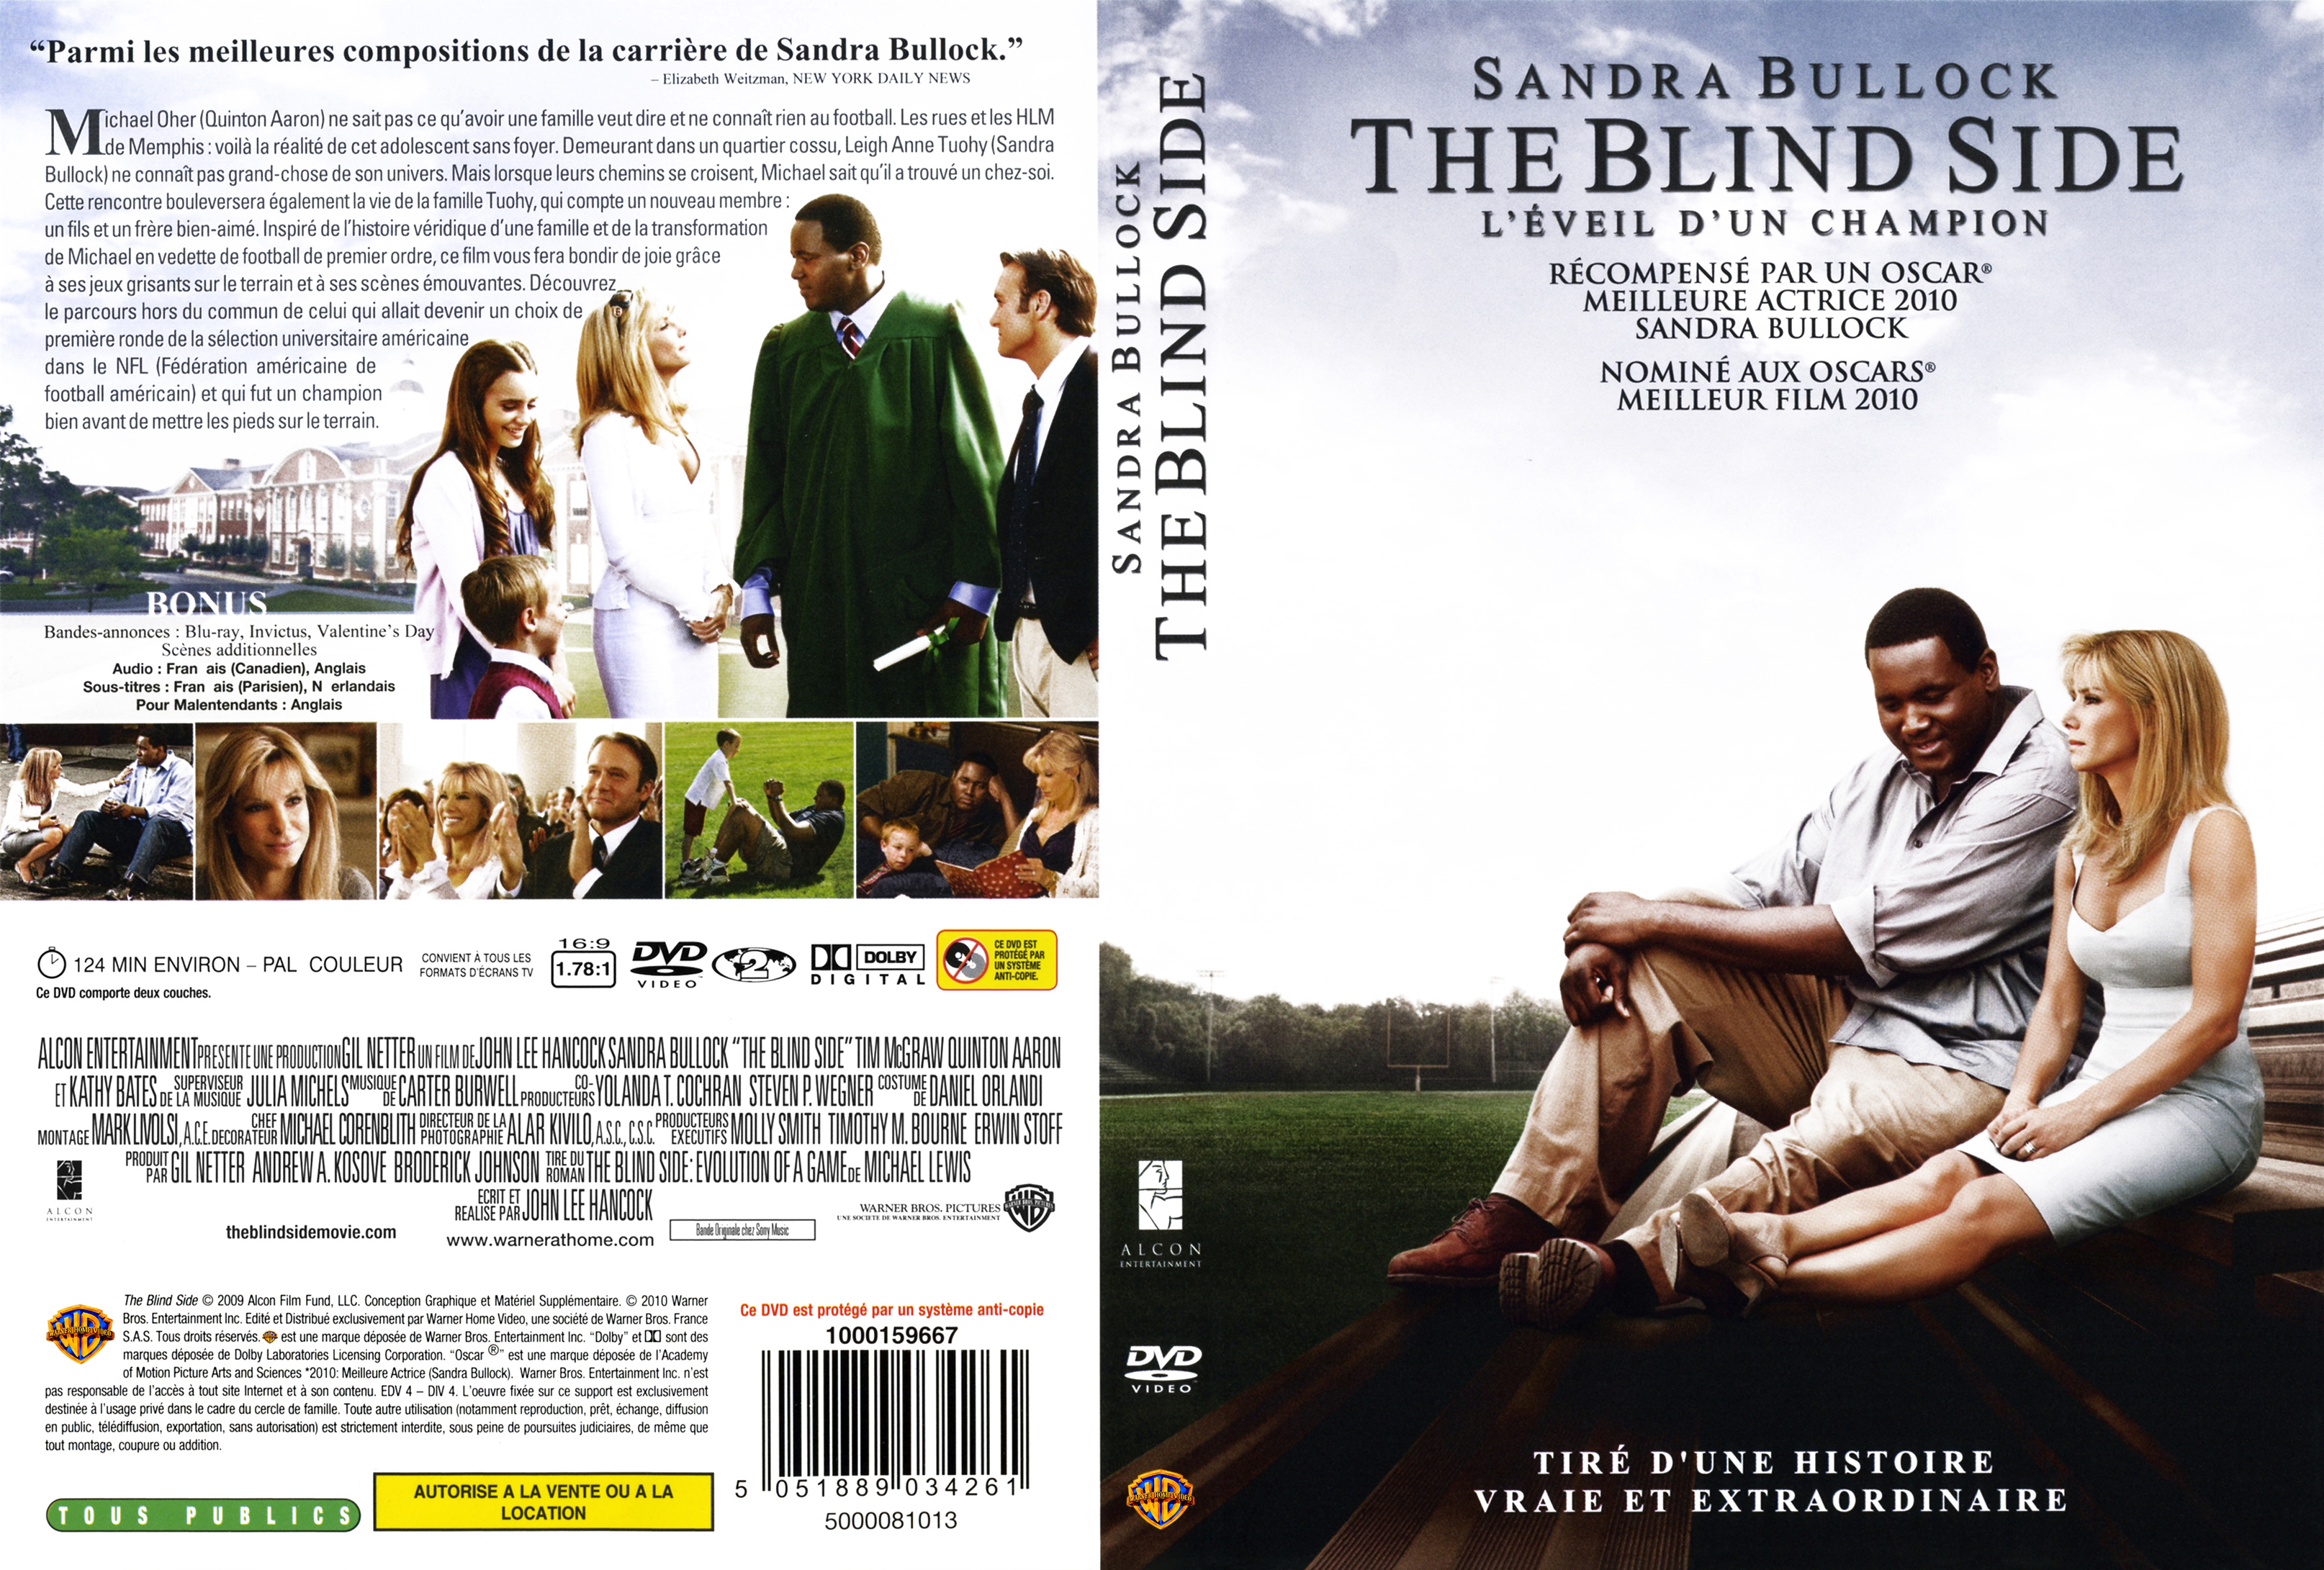 Jaquette DVD The blind side